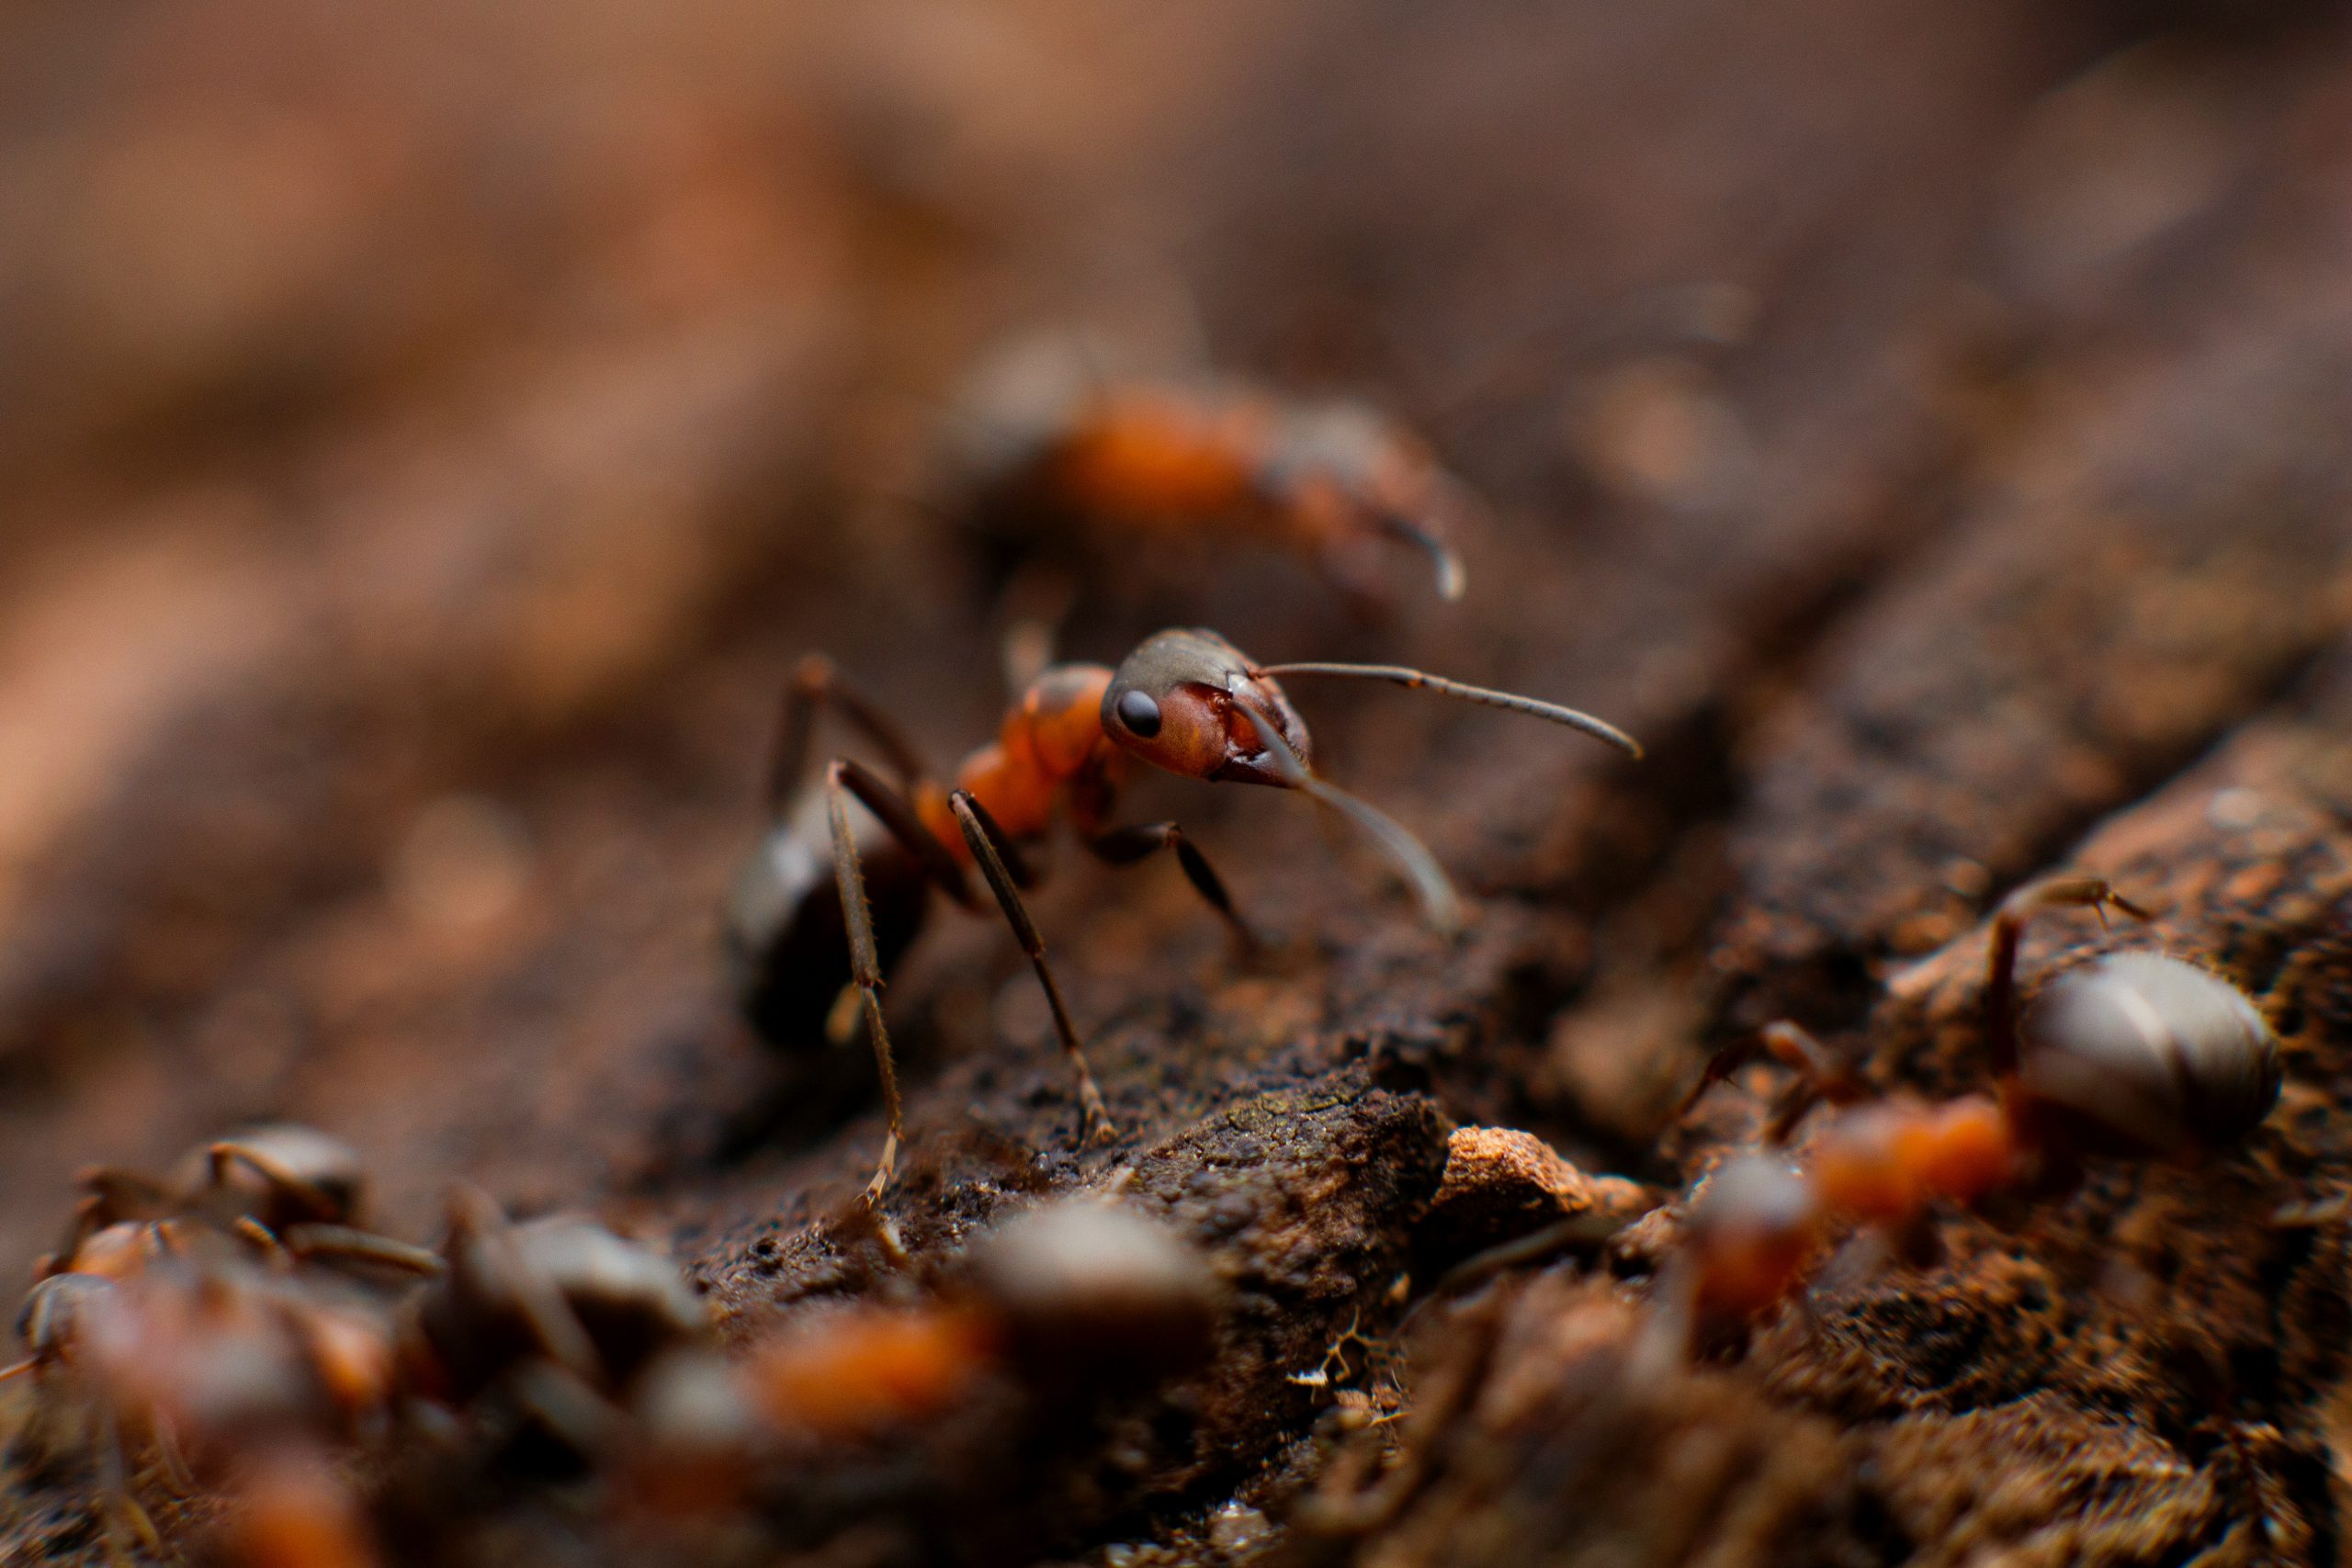 A close-up of red ants, details of one ant and its eyes clearly visible.